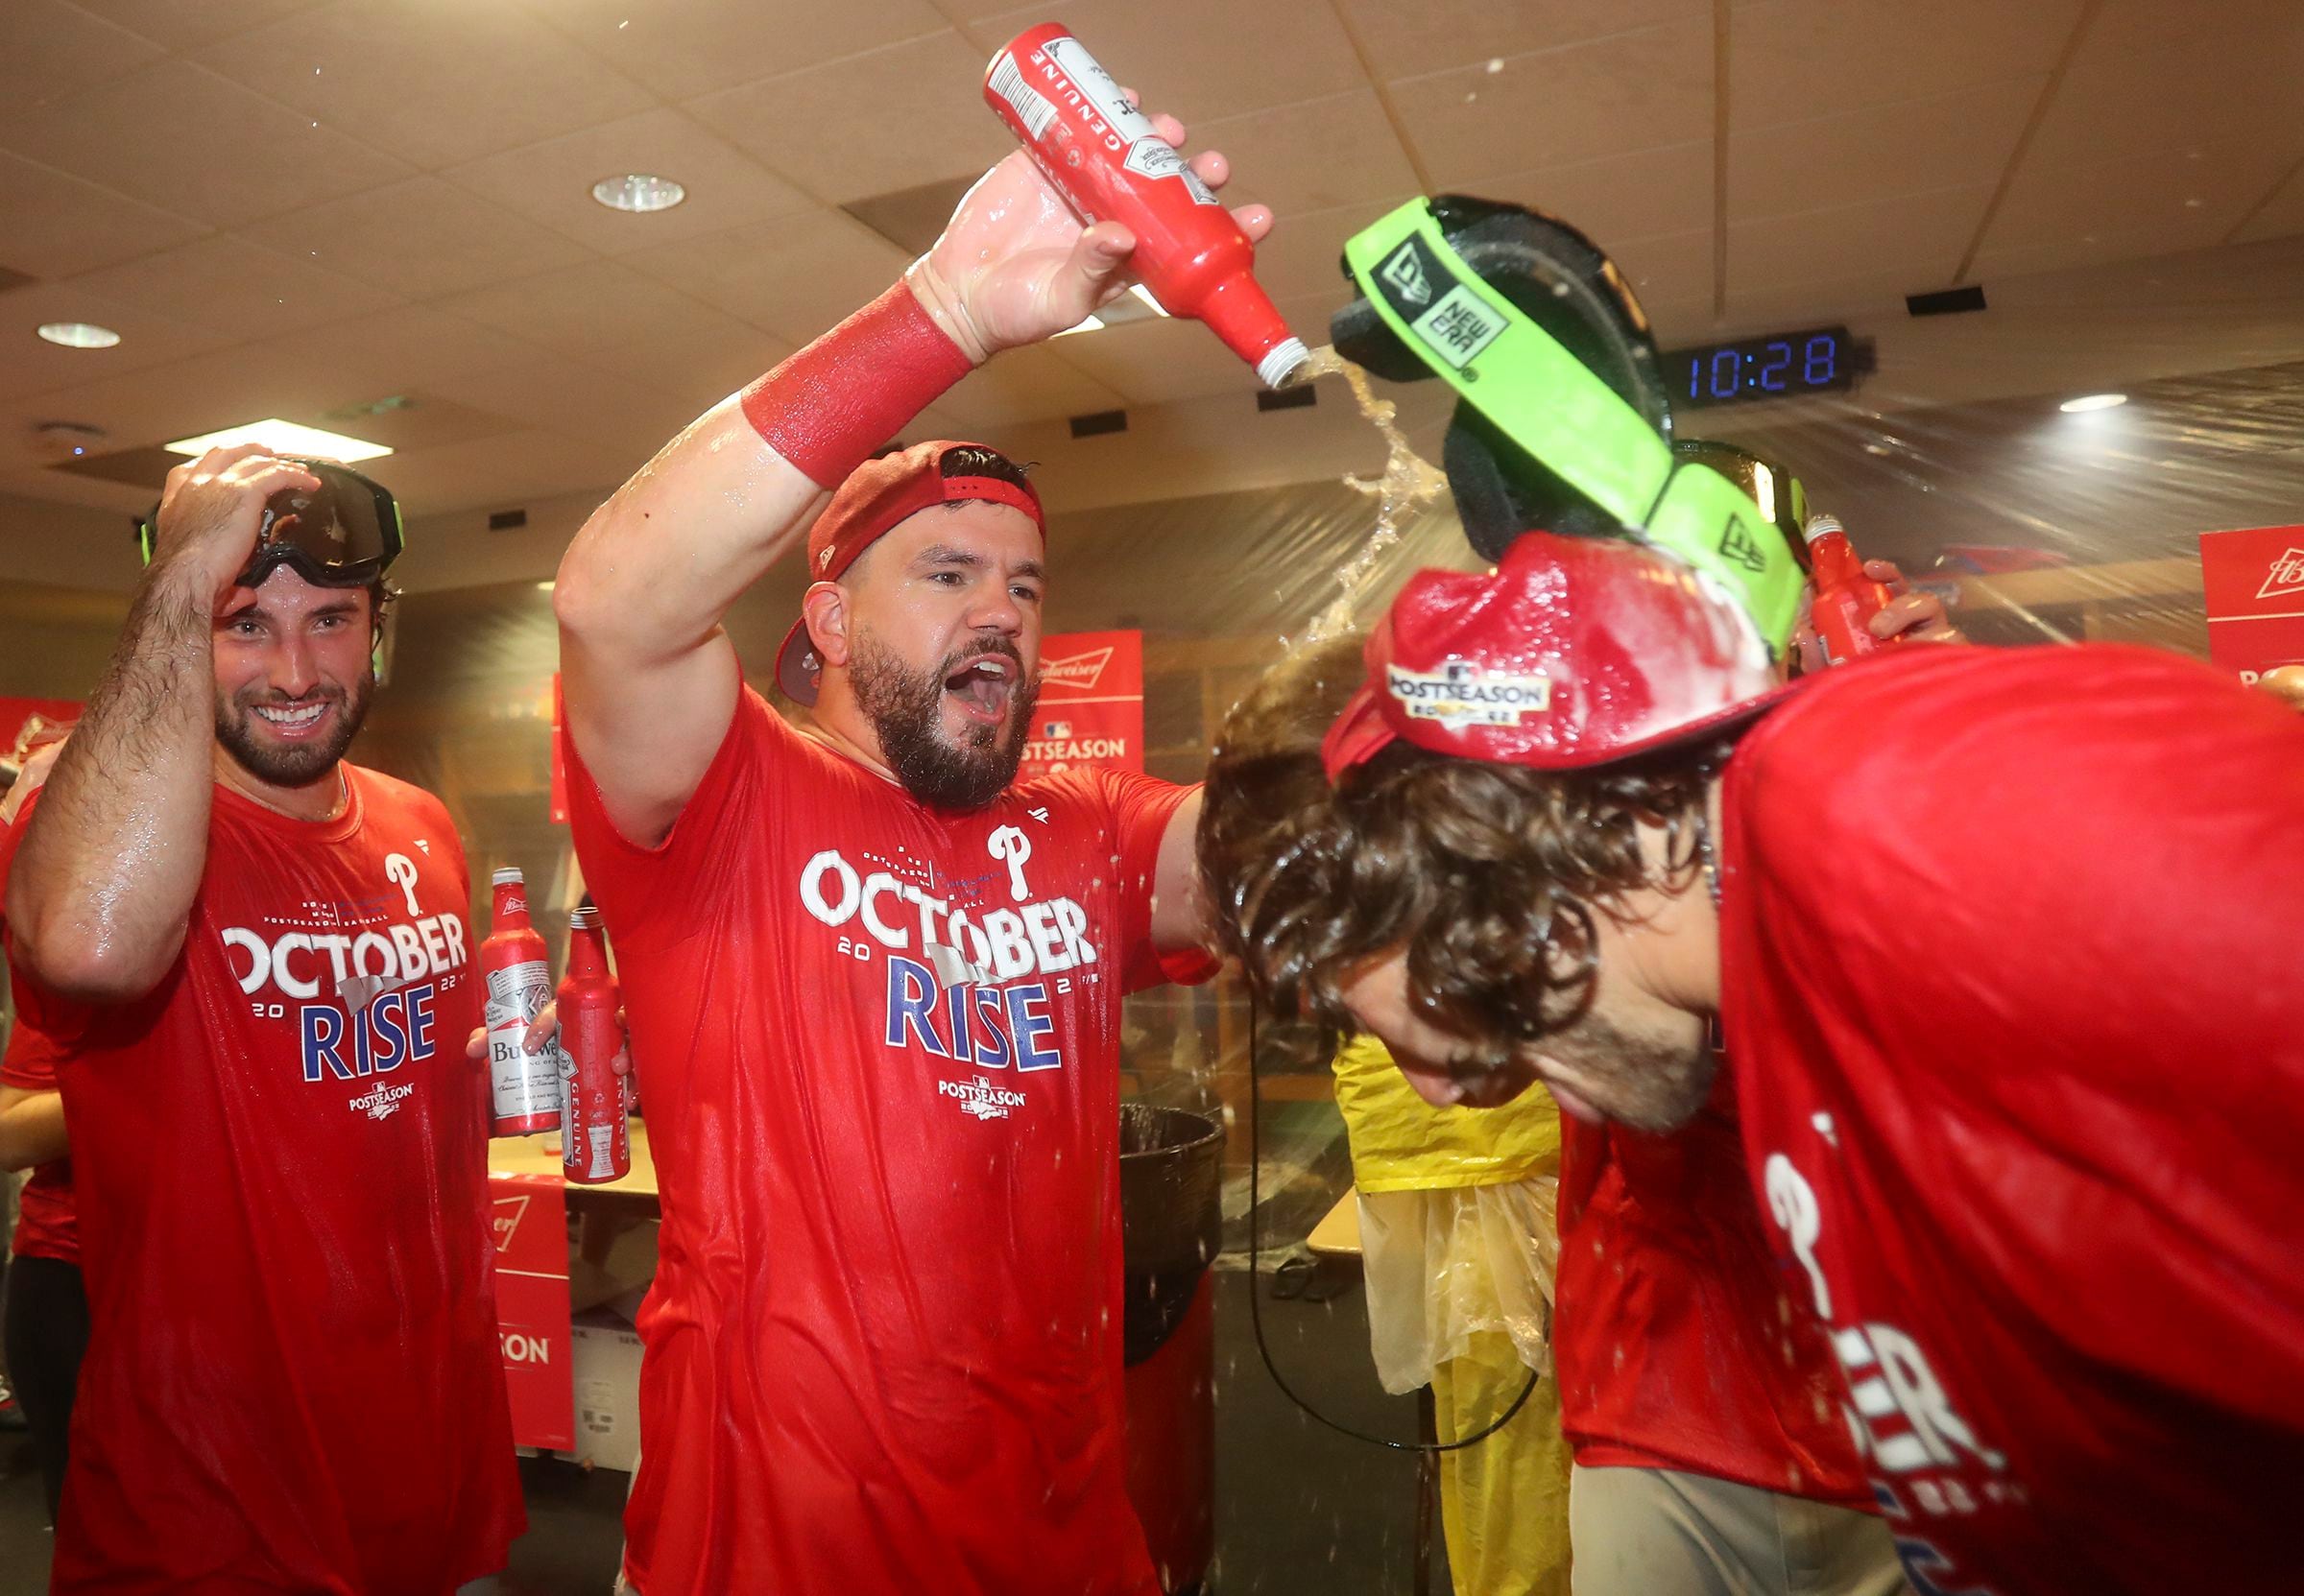 Phillies Red October: fans flock to team store after wild card clincher